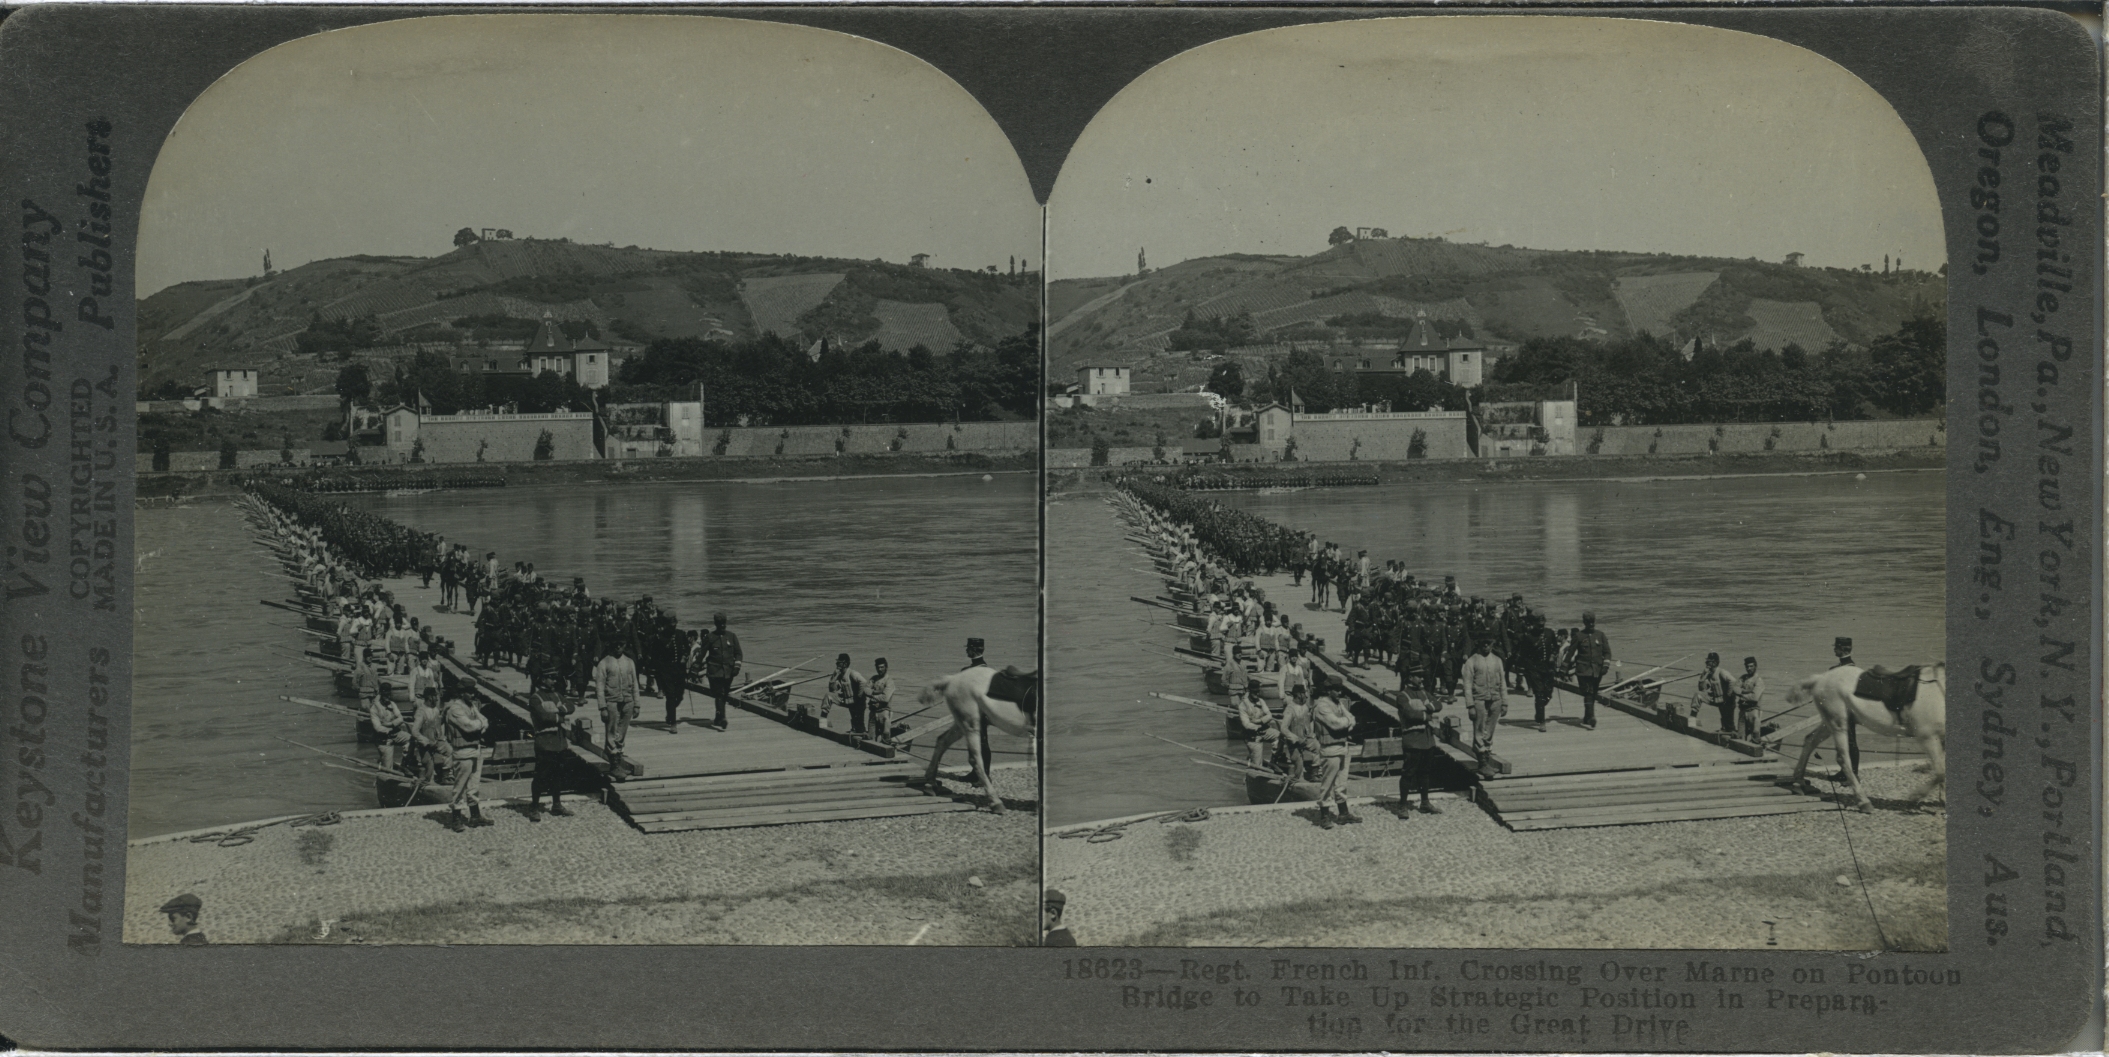 Regt. French Inf. Crossing Over Marne on Pontoon Bridge to Take Up Strategic Position in Preparation for the Great Drive